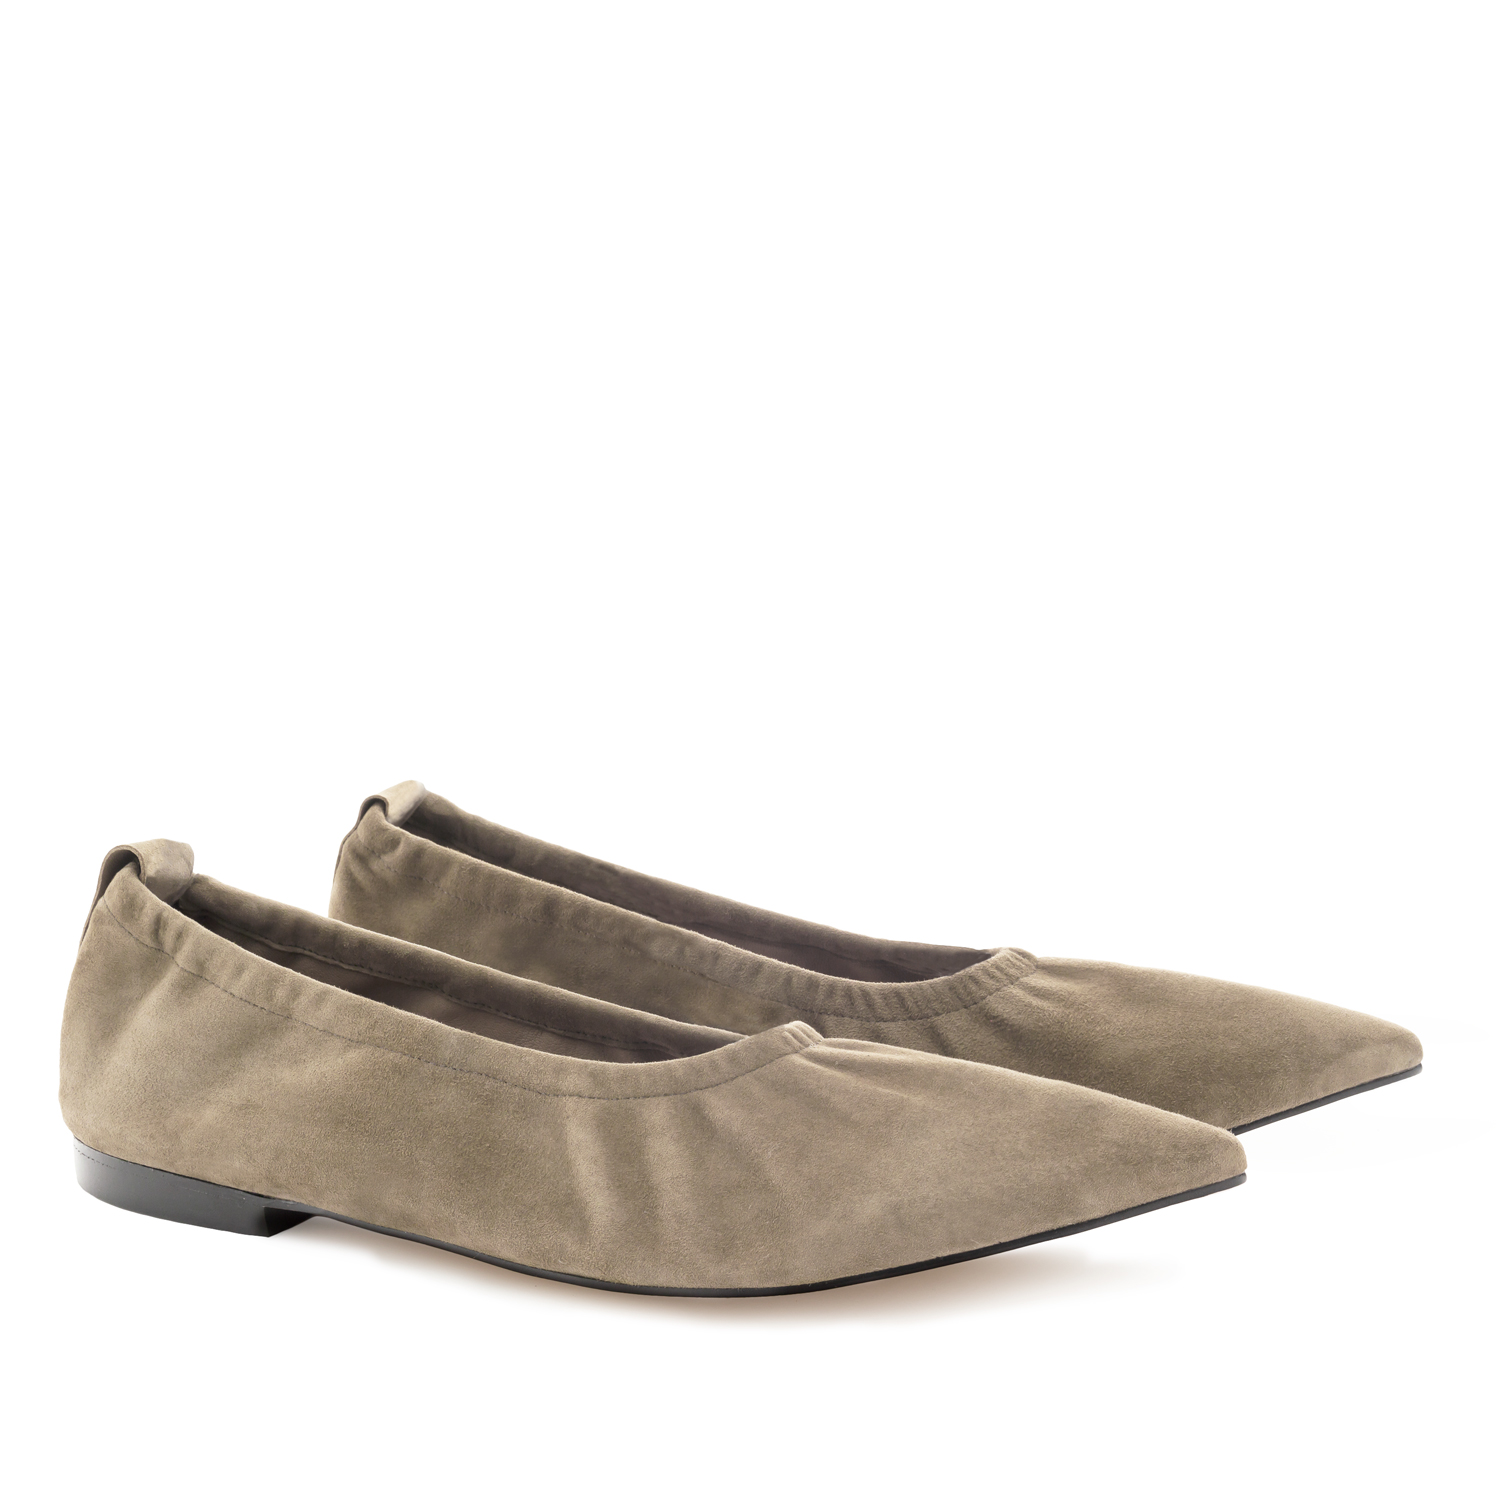 Elasticated Ballet Flats in Beige Suede Leather 